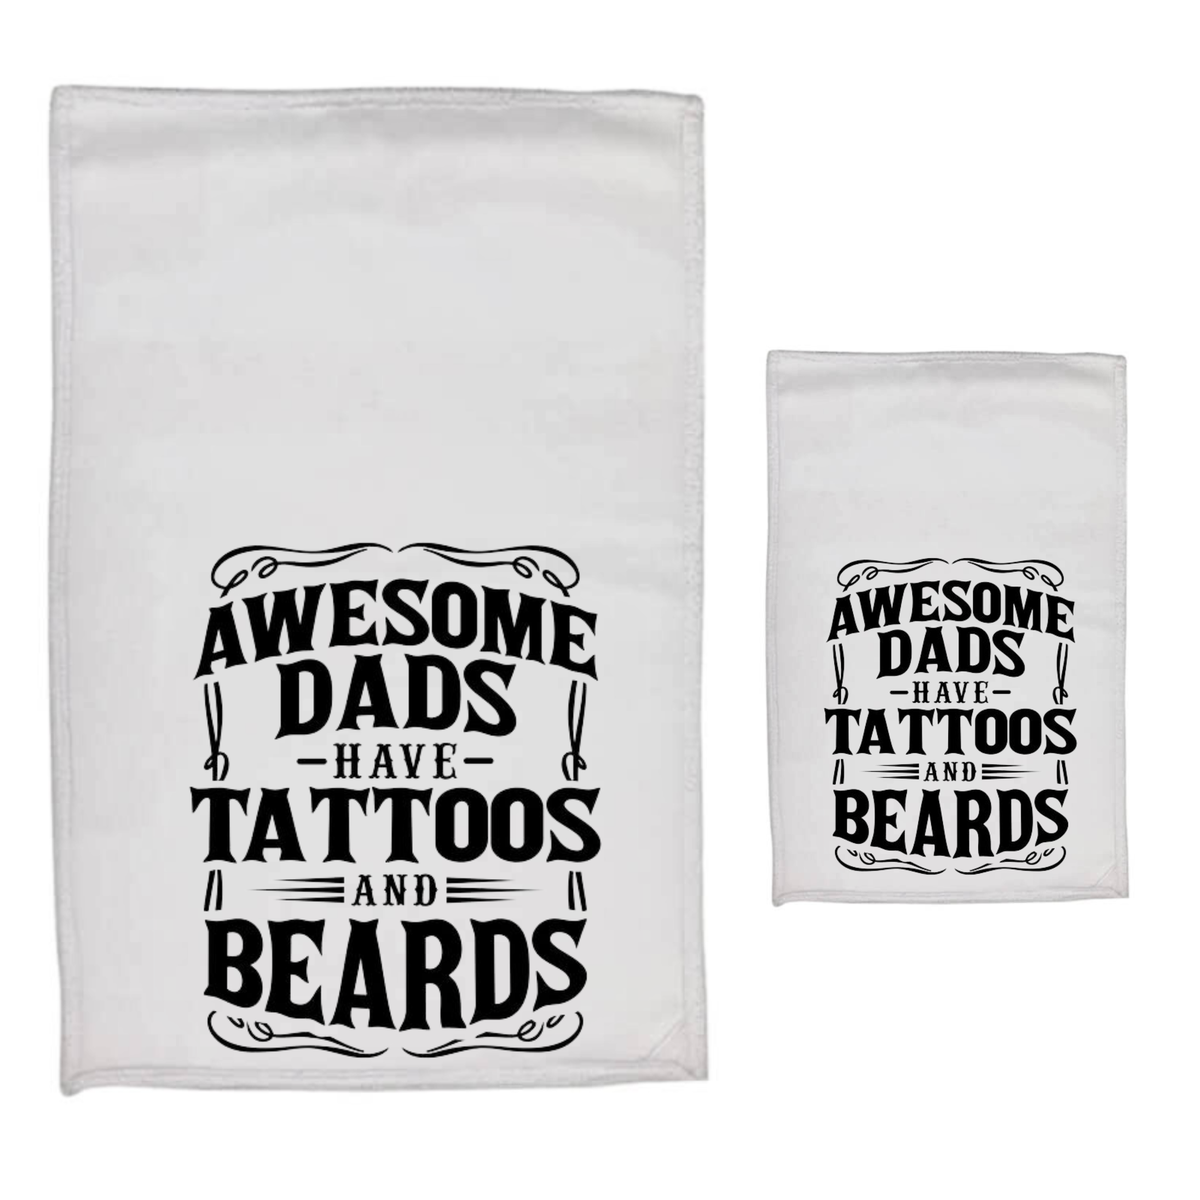 Dad Beards - White Polyester Hand & Face Towel